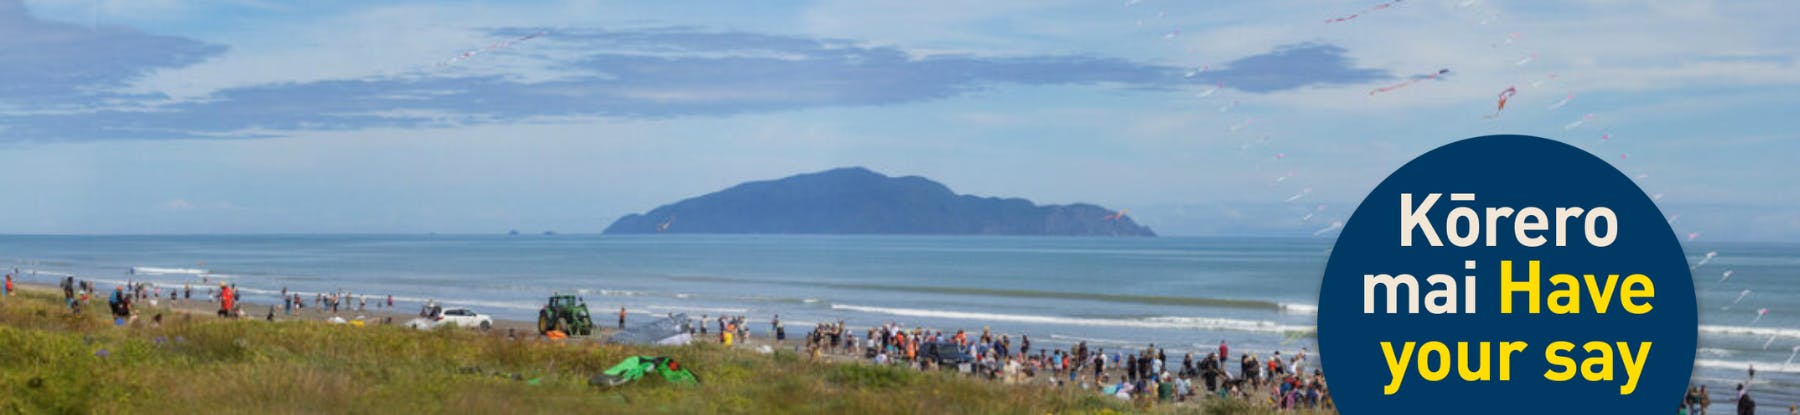 Kites flying and people at the Ōtaki Kite Festival at Ōtaki Beach, with Kāpiti Island in the background. 